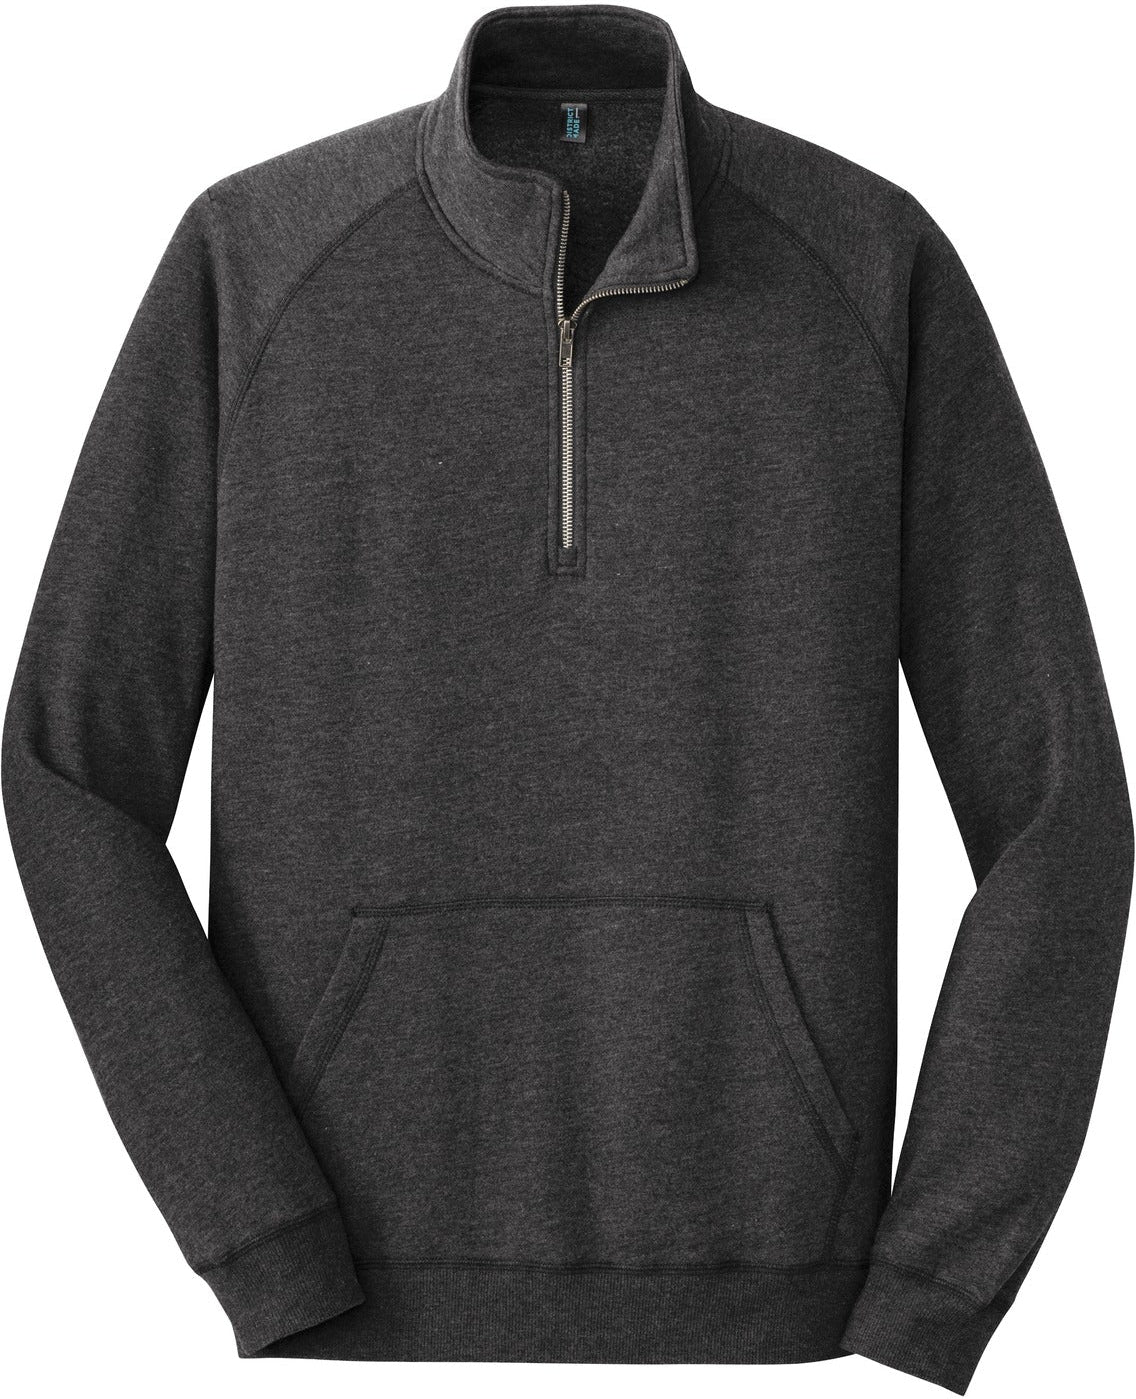 District DM392 Quarter-Zip Pullover with Custom Embroidery